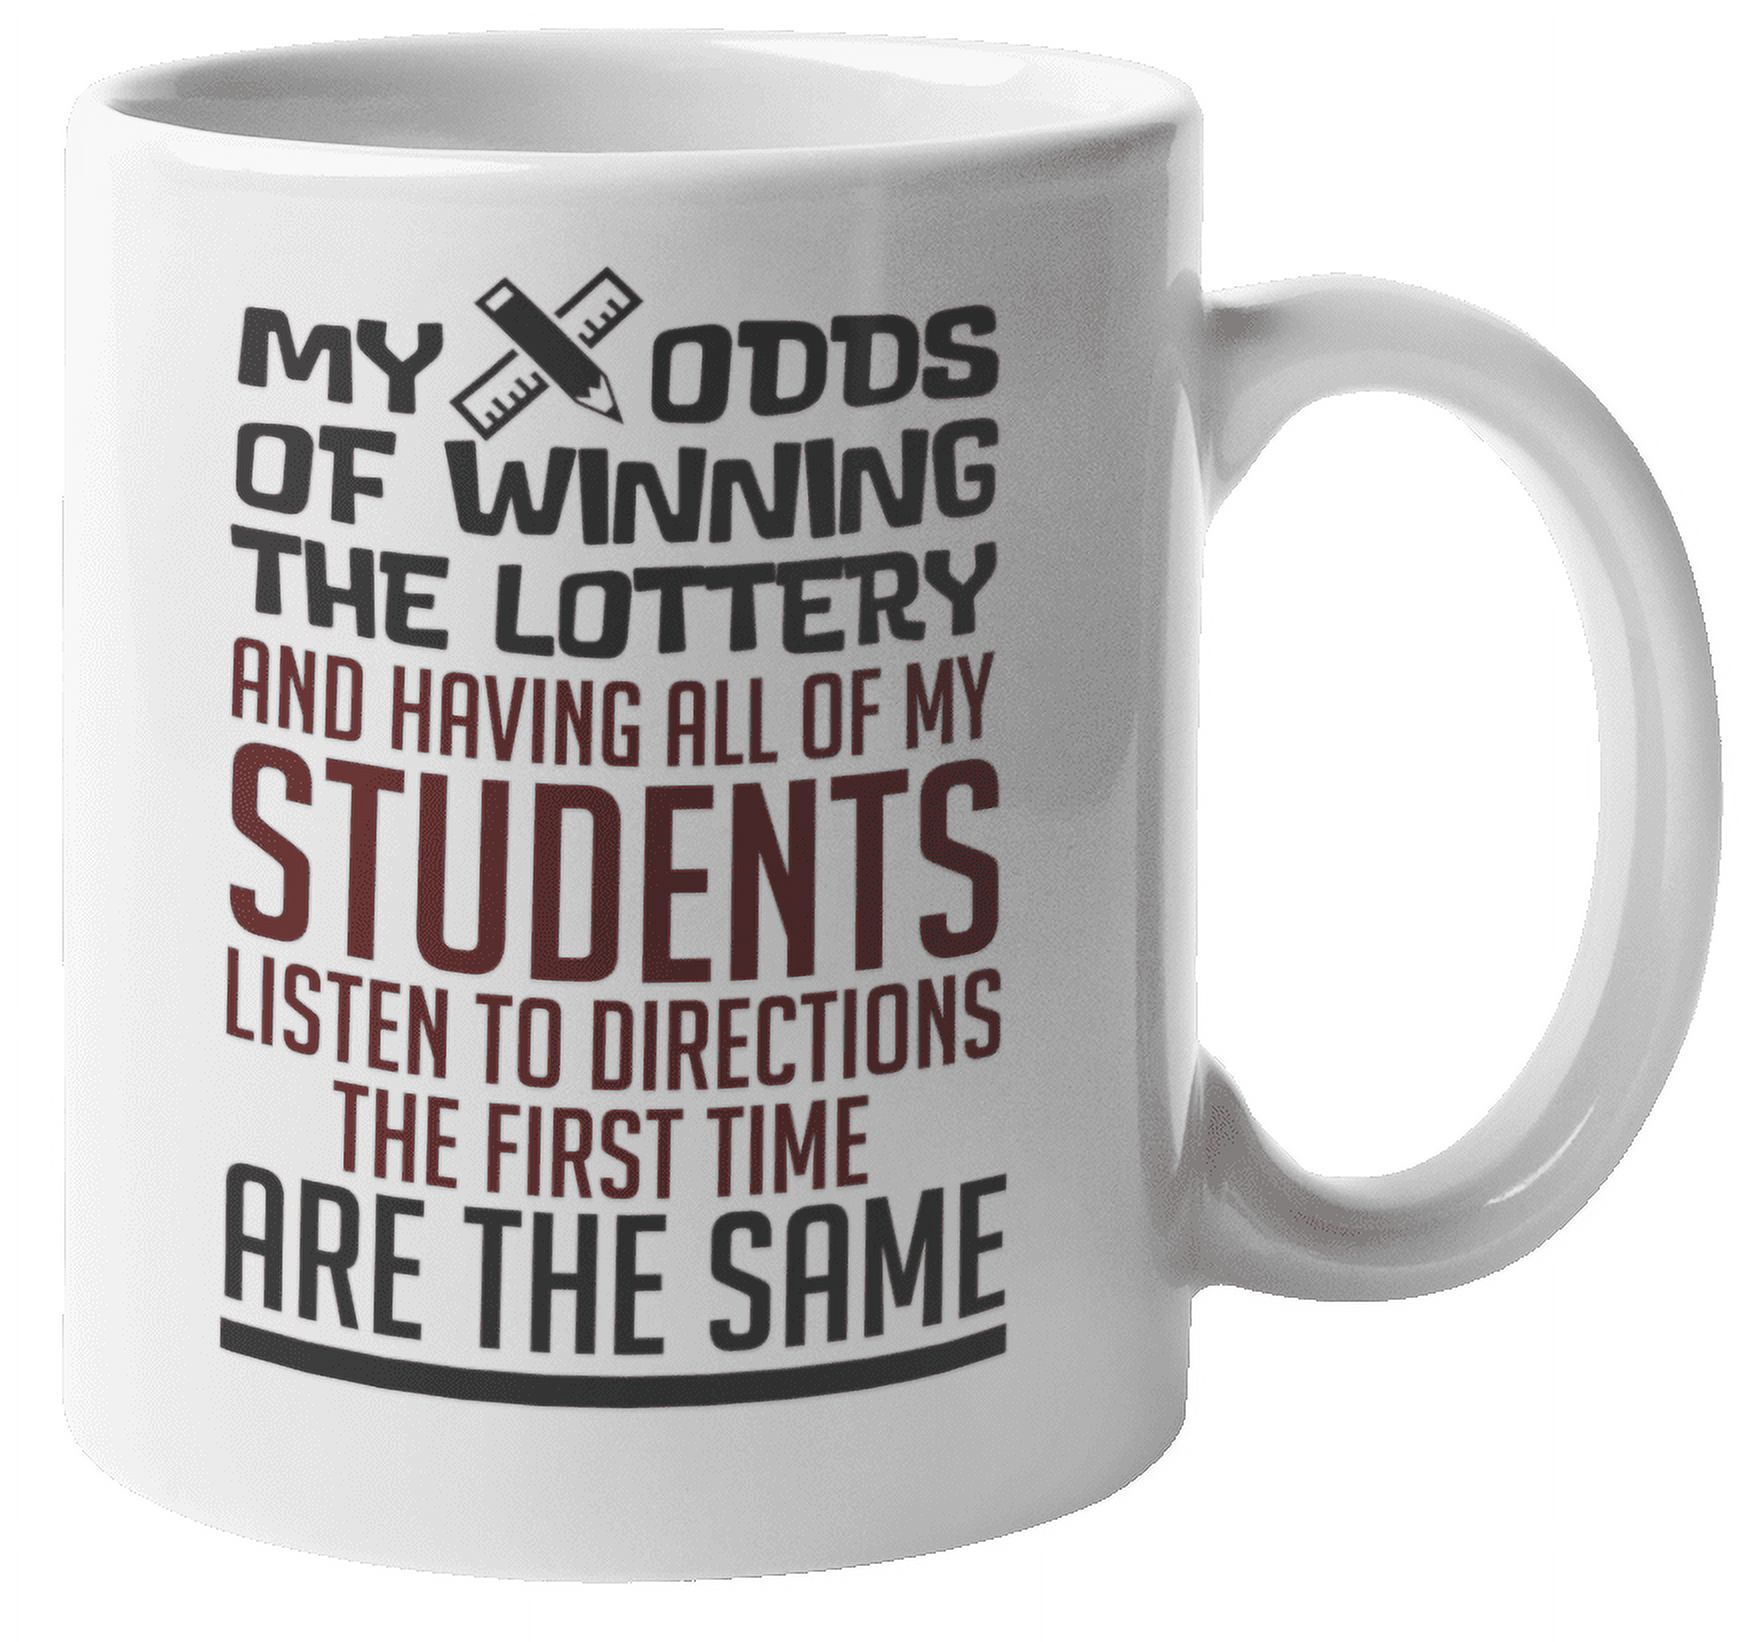 My Odds Of Winning The Lottery And Having All Of My Students Listen Are The Same. Funny Teaching Coffee & Tea Mug For Best Teacher, Instructor, Professor, Educator, Adviser & Young Scholar (11oz) - image 1 of 3